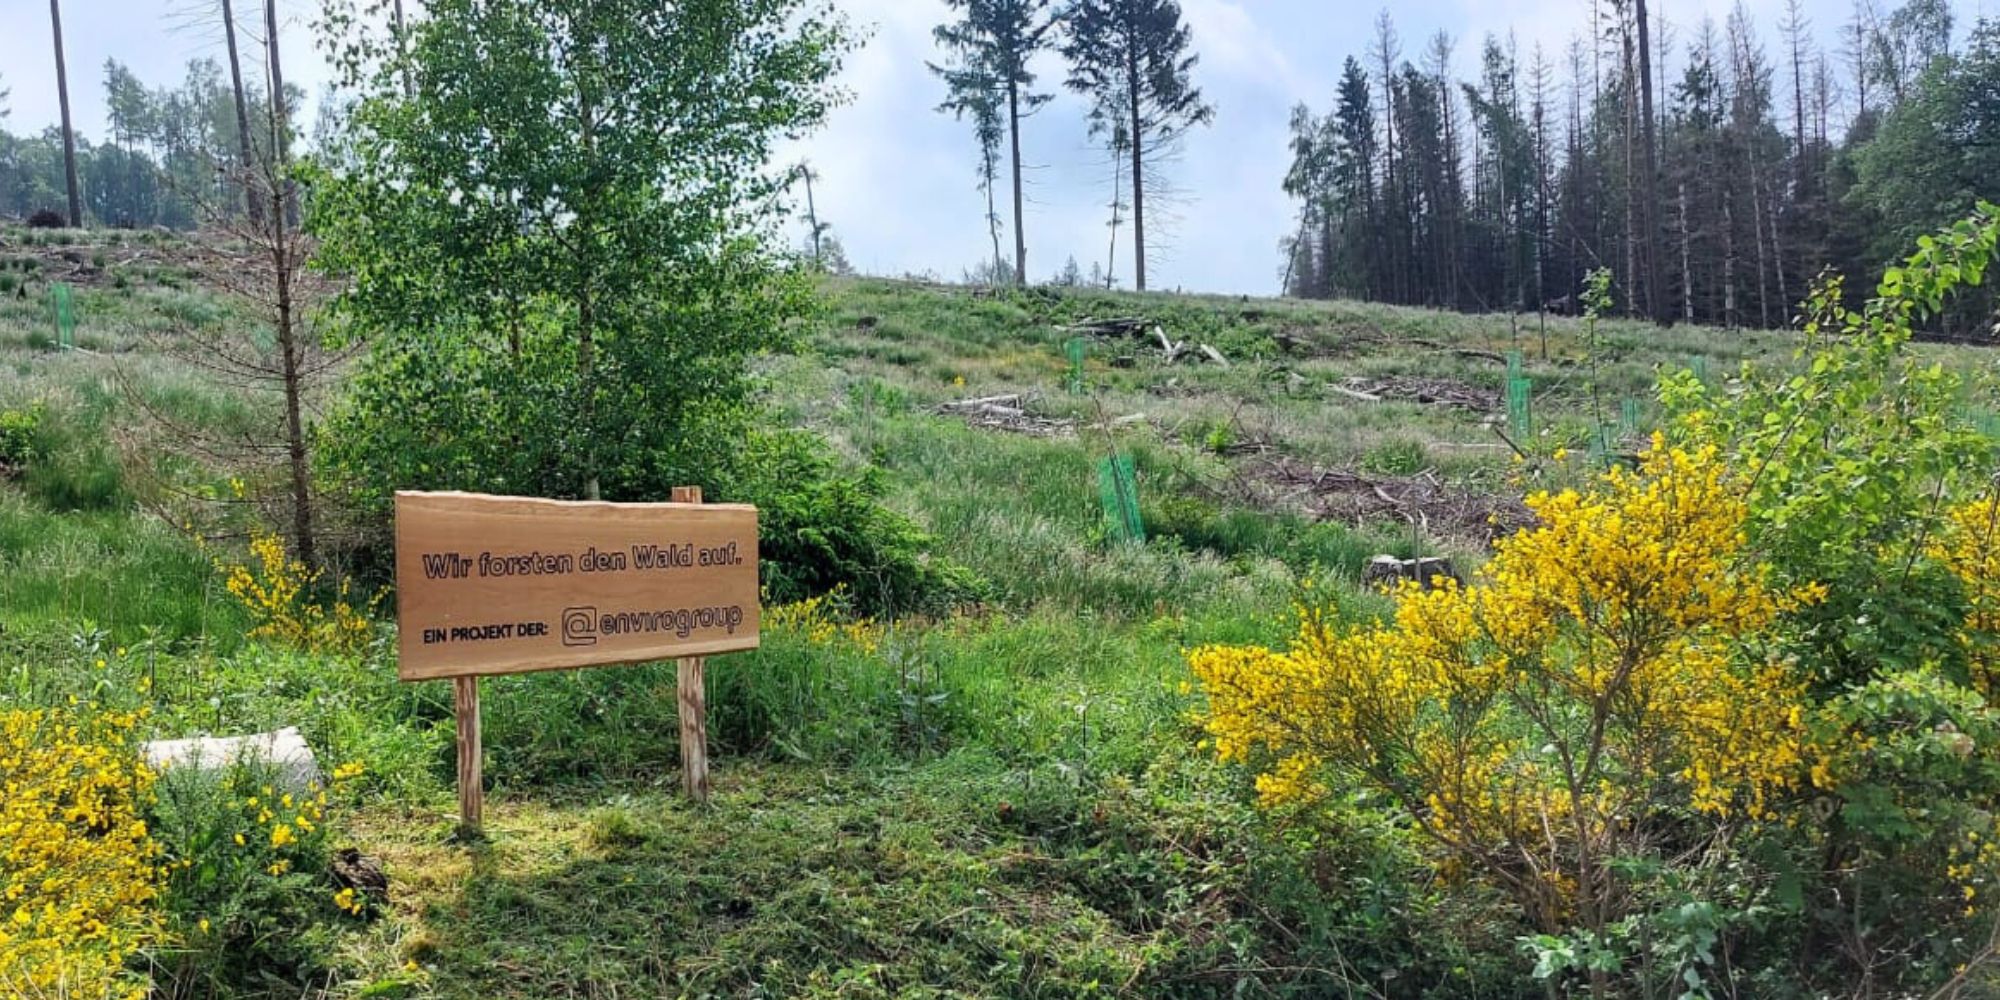 envirogroup sign in the forest with the inscription &quot;we are reforesting, a project of the envirogroup&quot;.